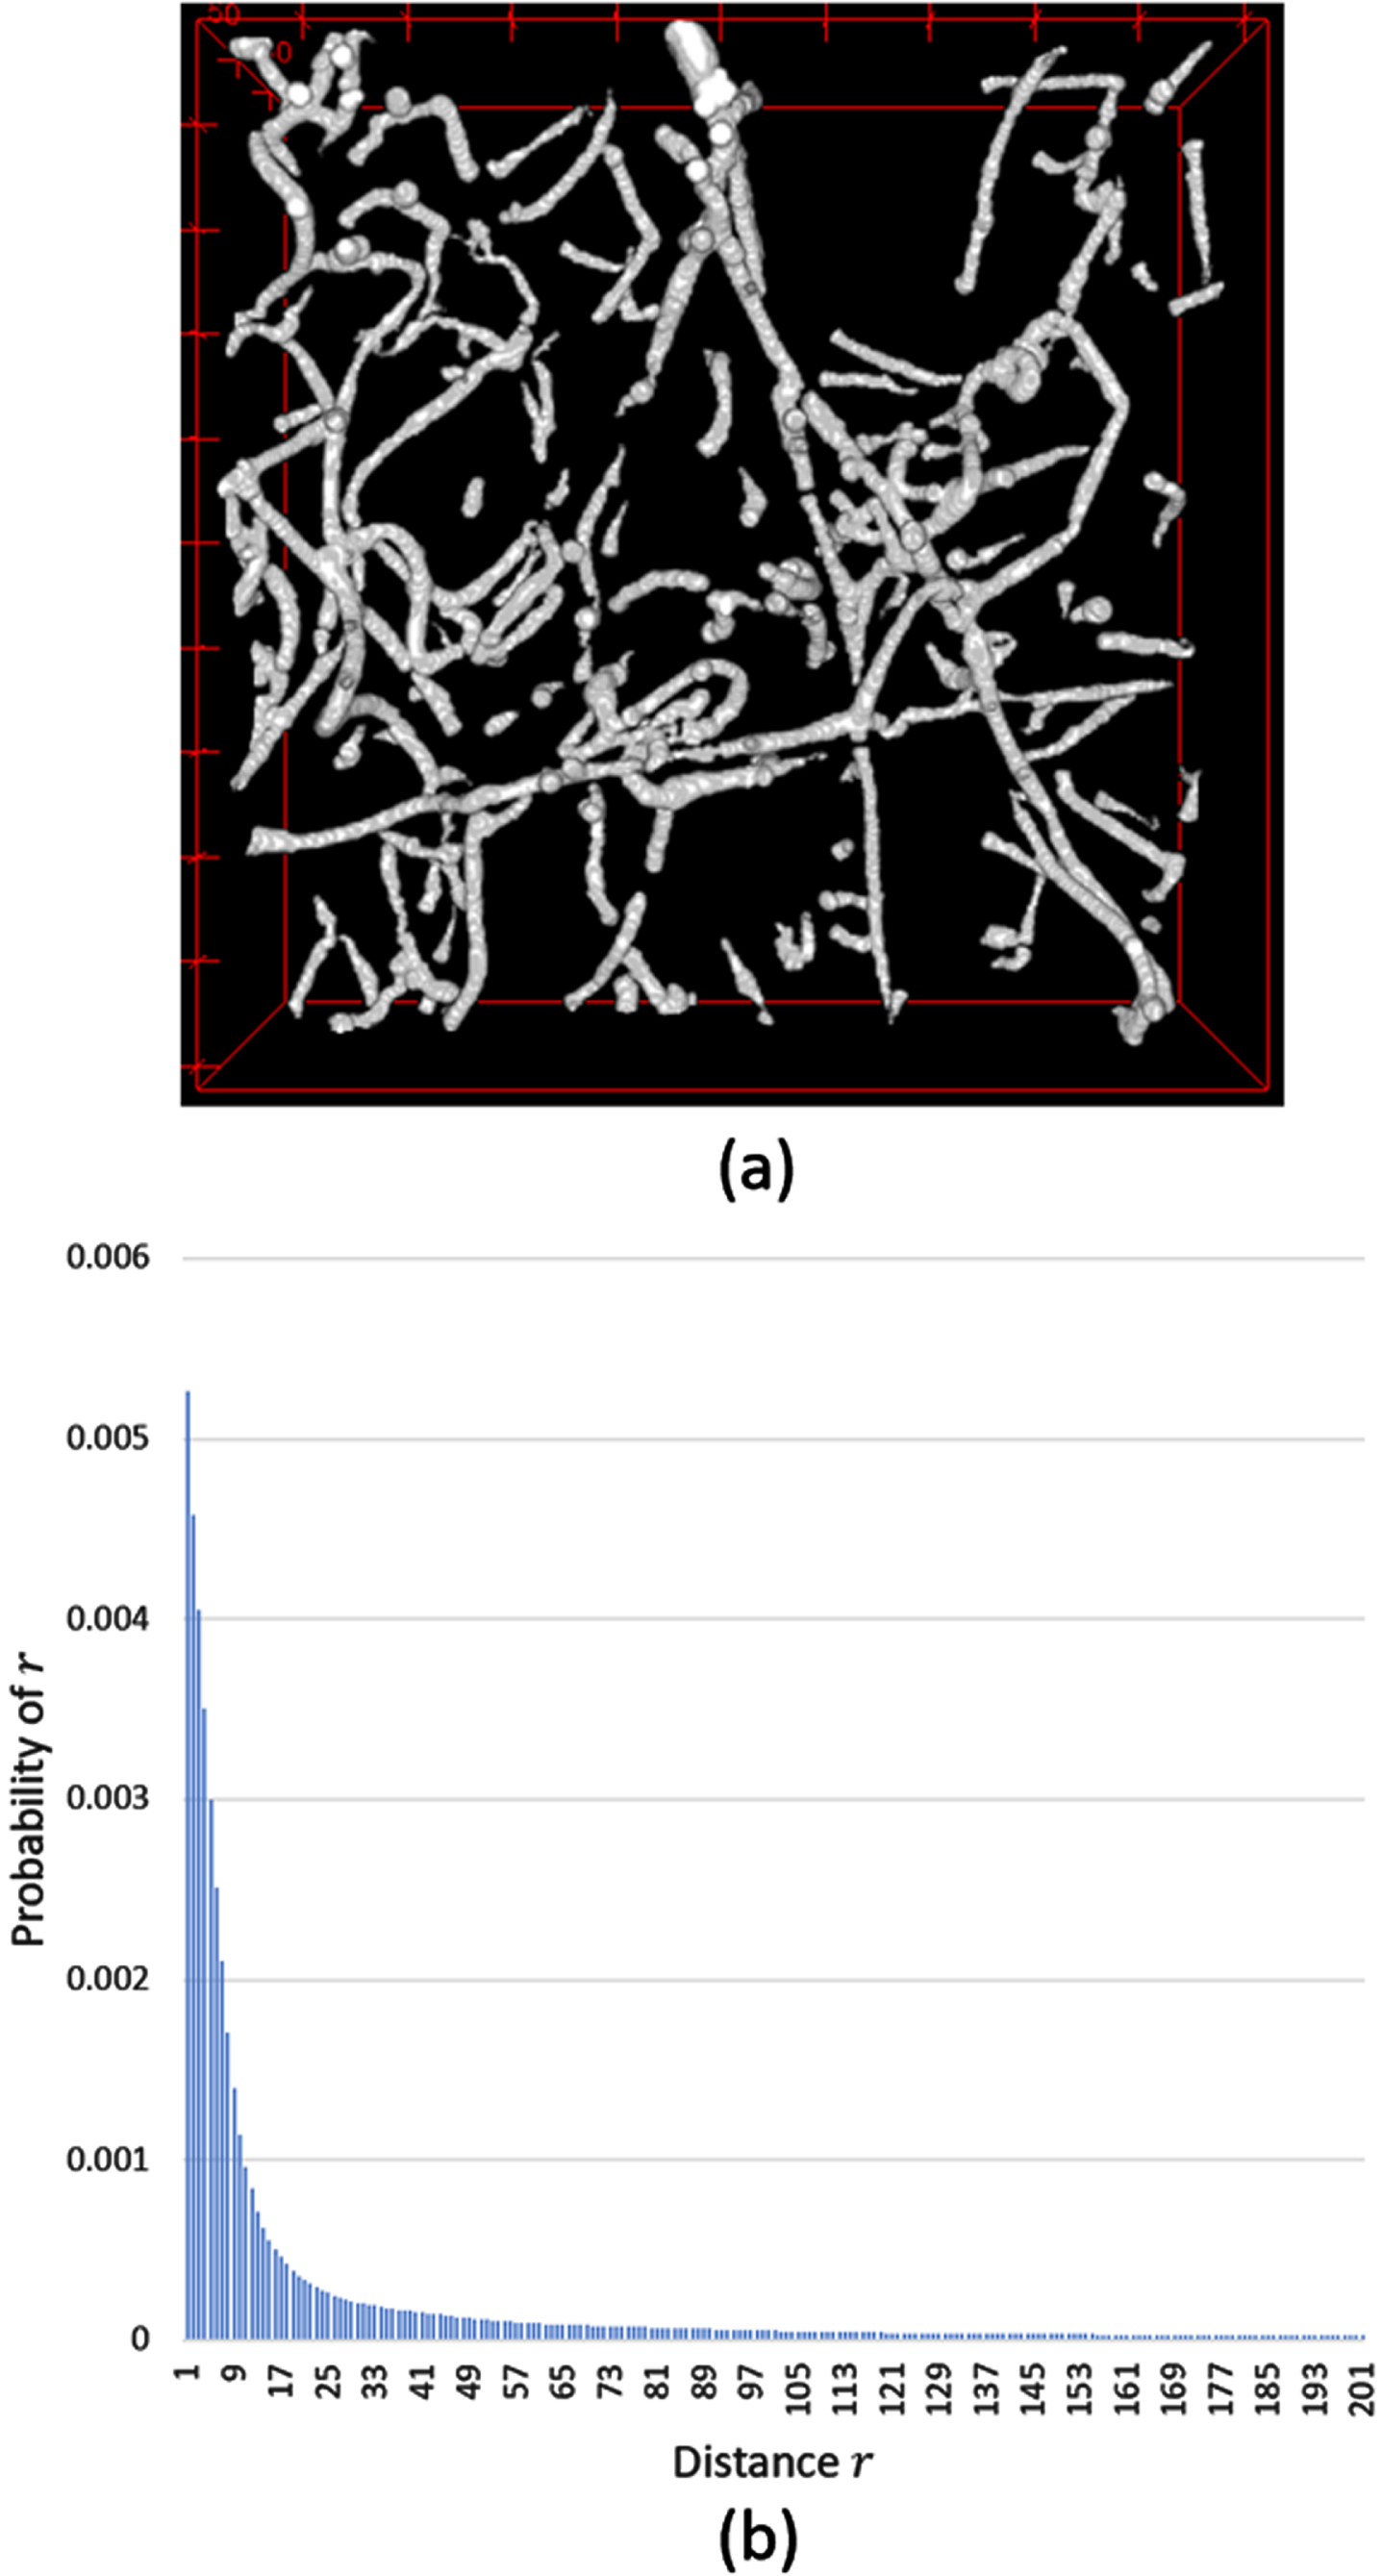 An example of the distribution of a two-point correlation function (TPCF) (a) The 3-dimensional image contains two phases (white phase: a fiber network, black phase: background). (b) The probability distribution of TPCF calculated from the image in (a).